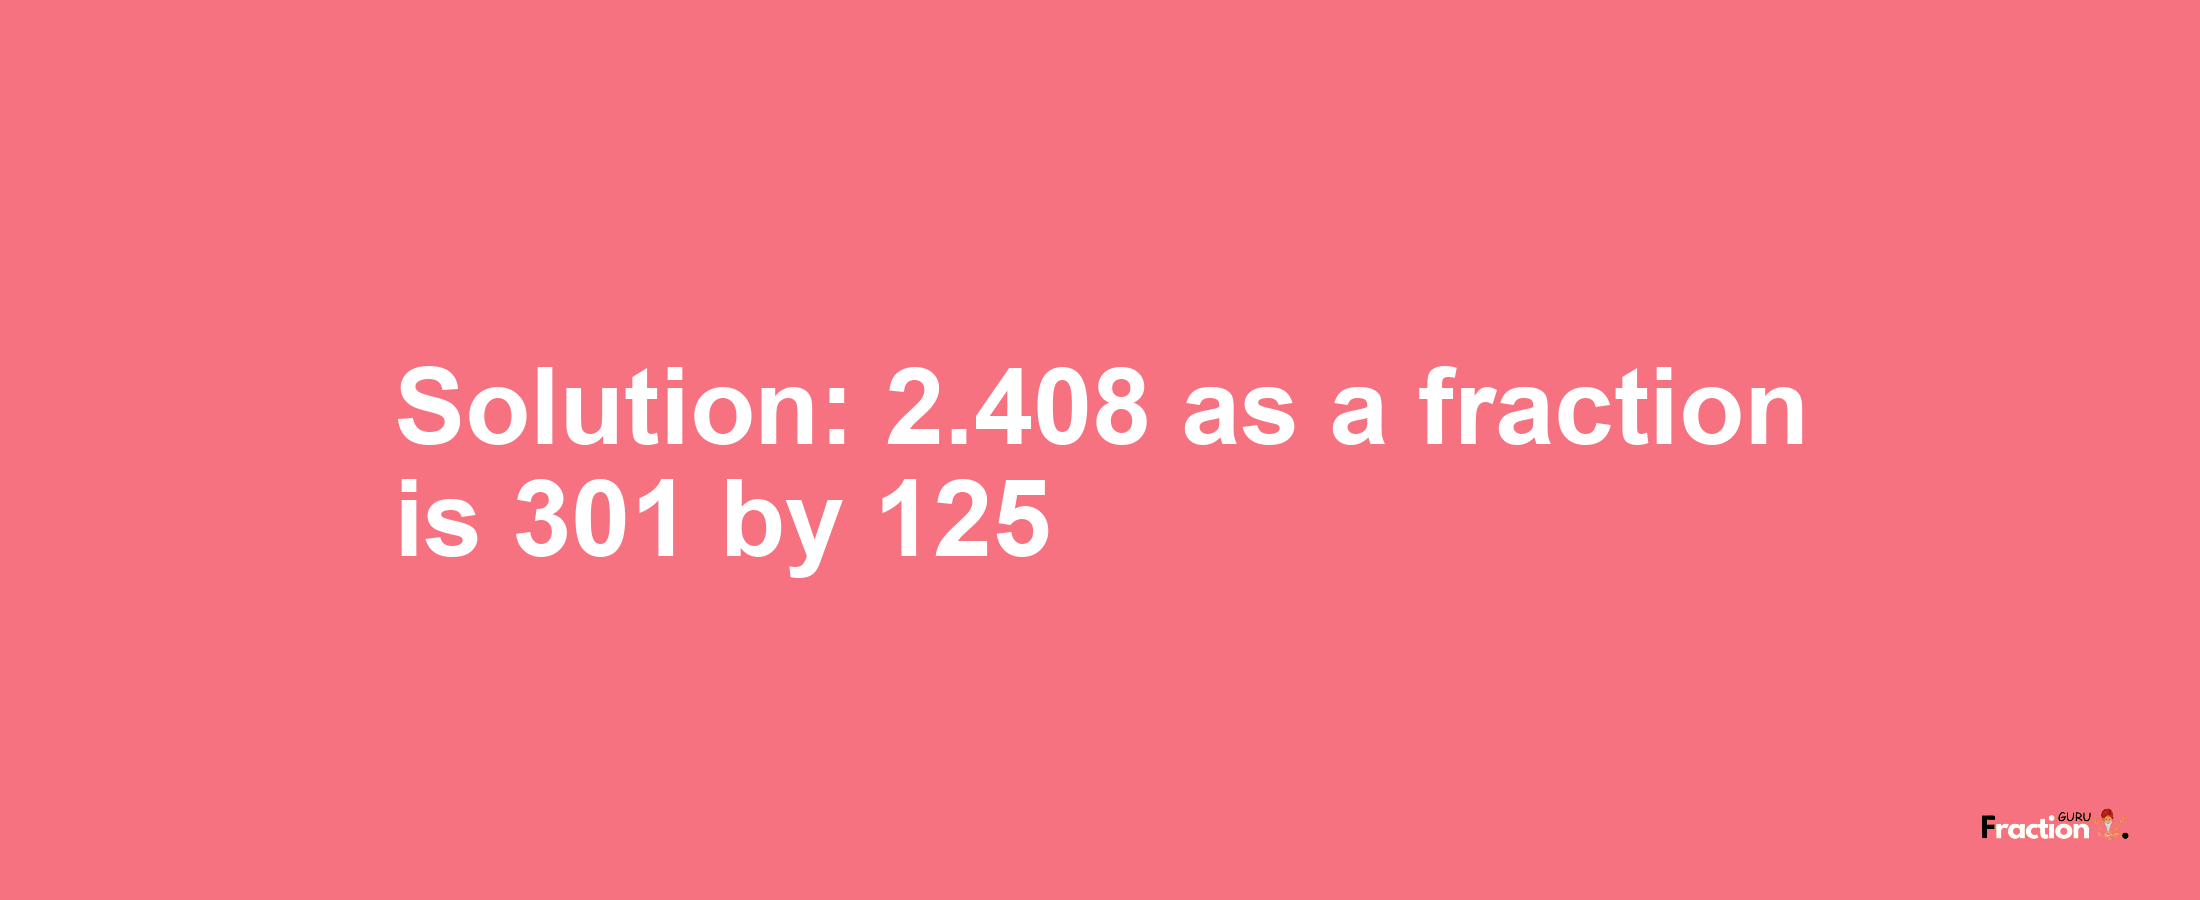 Solution:2.408 as a fraction is 301/125